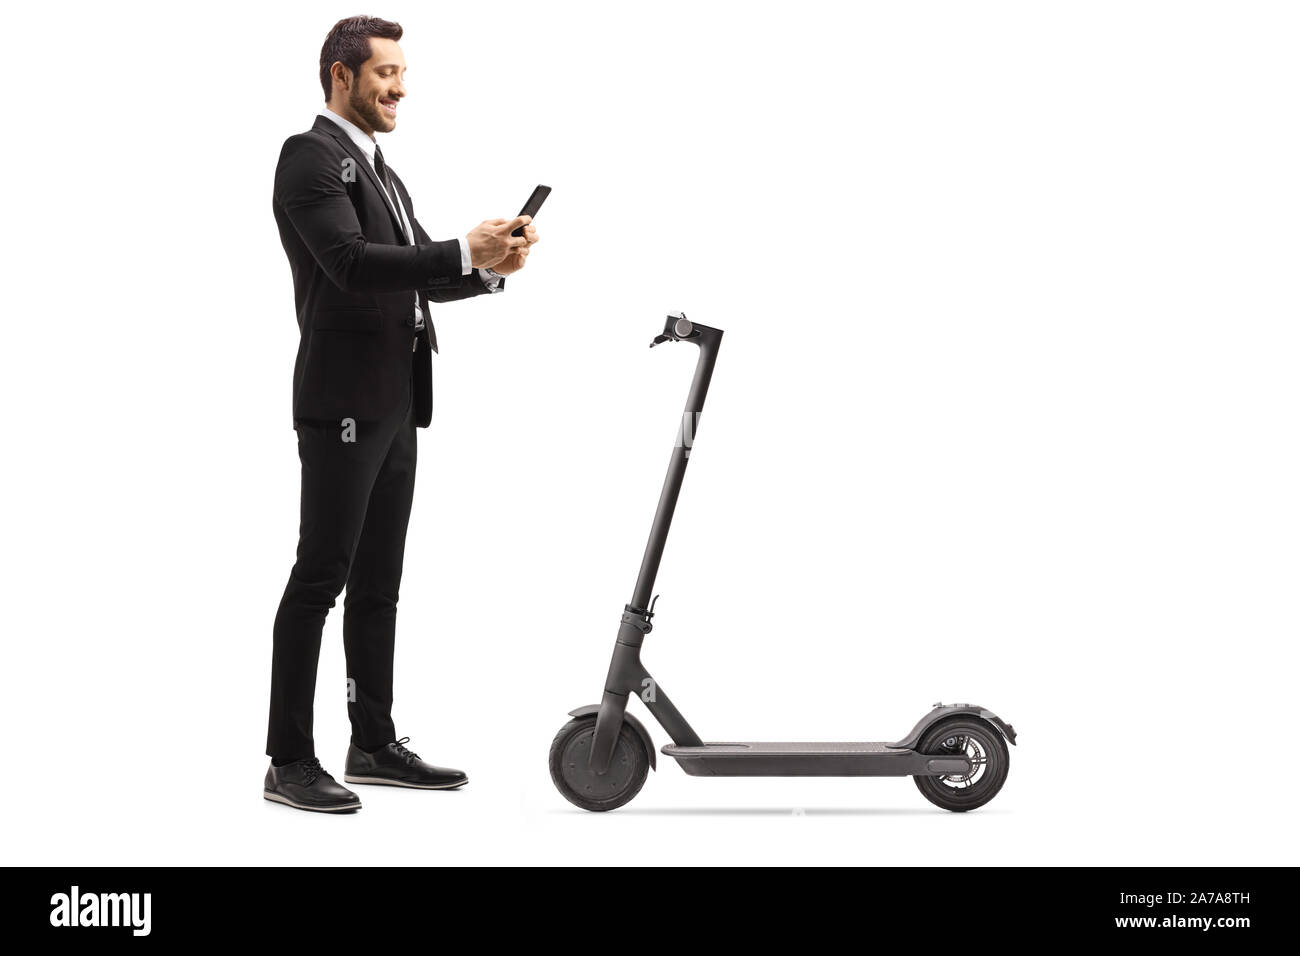 Full length shot of a businessman renting an electric scooter with a mobile phone application isolated on white background Stock Photo